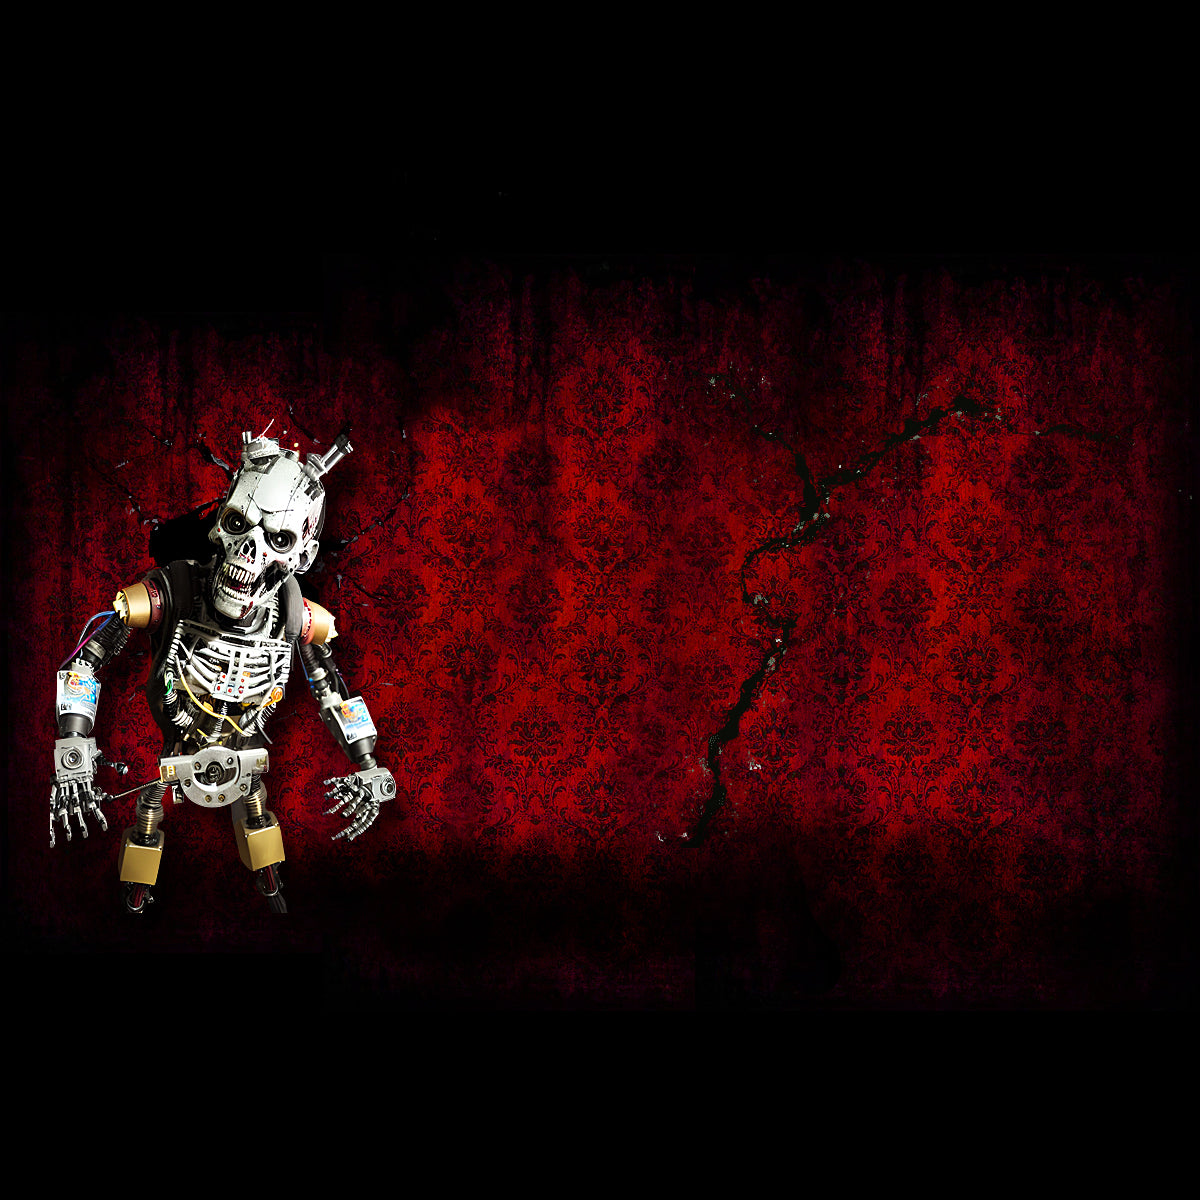 CAN FREDDY AND THE ANIMATRONICS STEAL GRENNY FROM THE NIGHTMARE